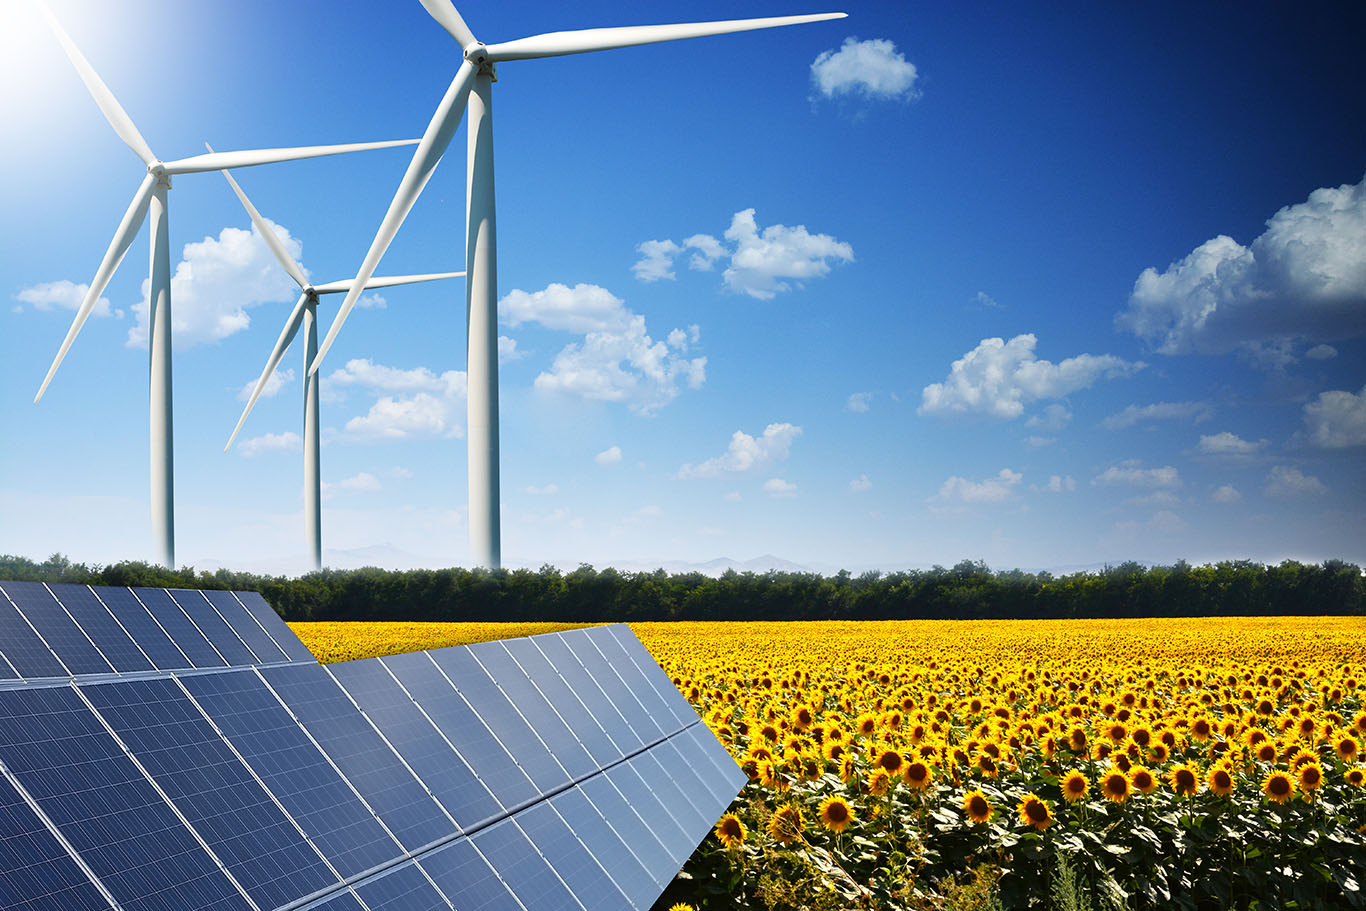 grants-for-renewable-energy-projects-association-of-oregon-counties